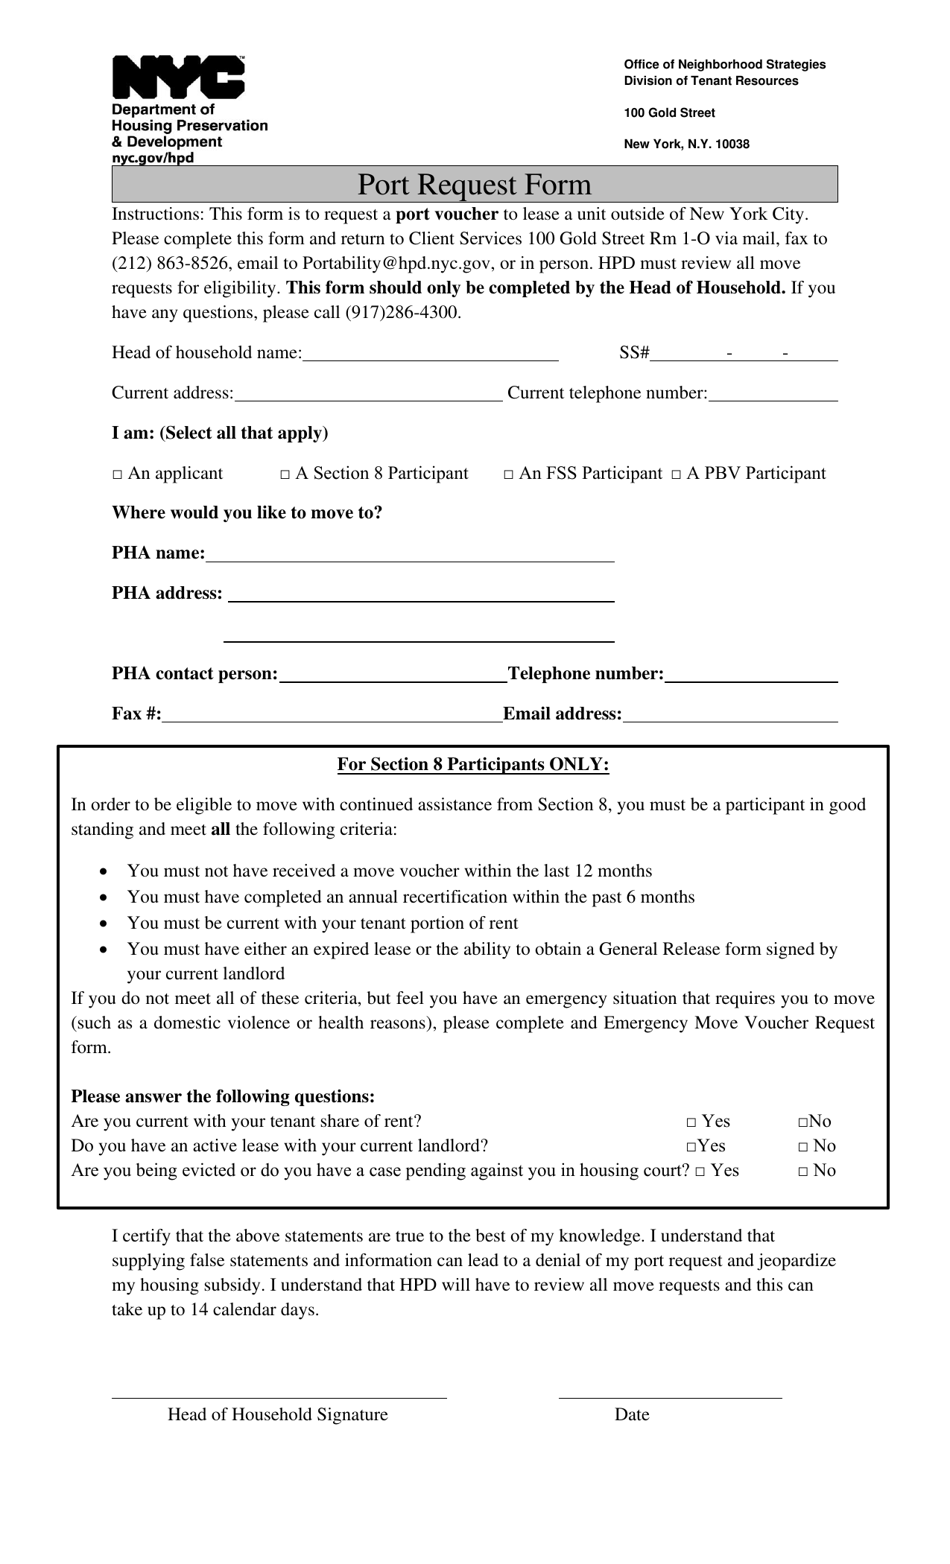 Port Request Form - New York City, Page 1